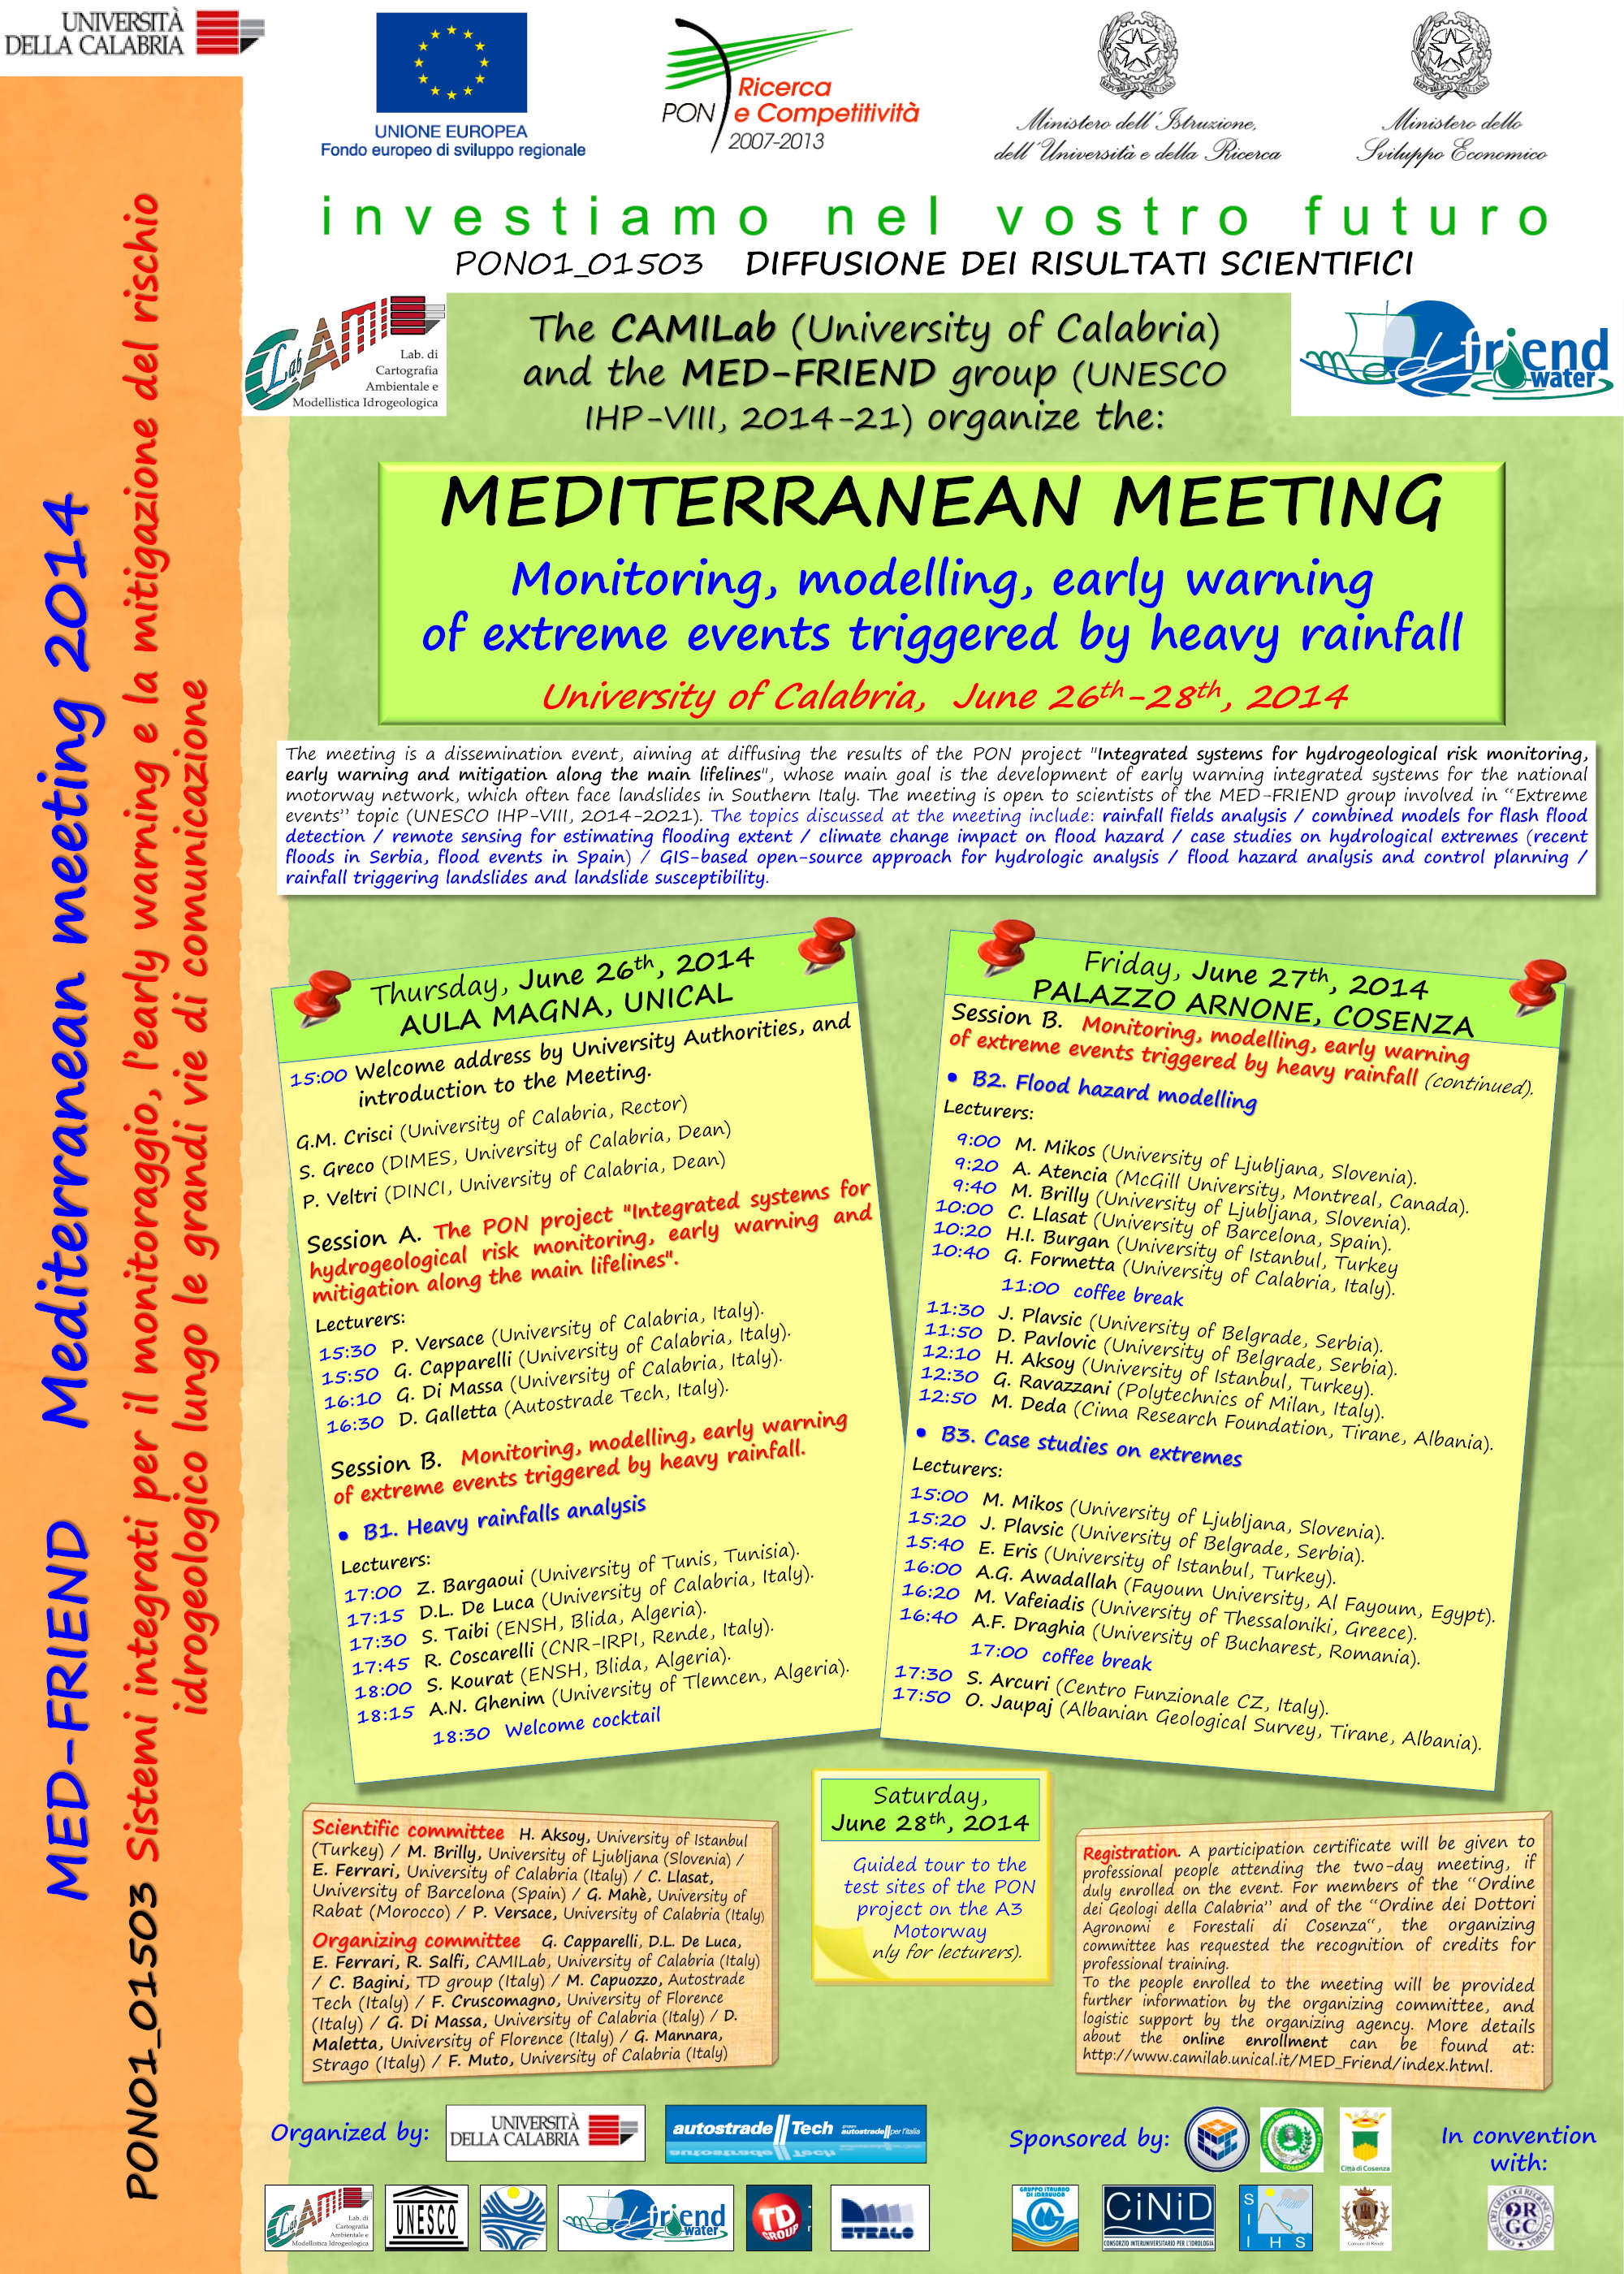 Mediterranean Meeting - Monitoring, modelling, early warning of extreme events triggered by heavy rainfall